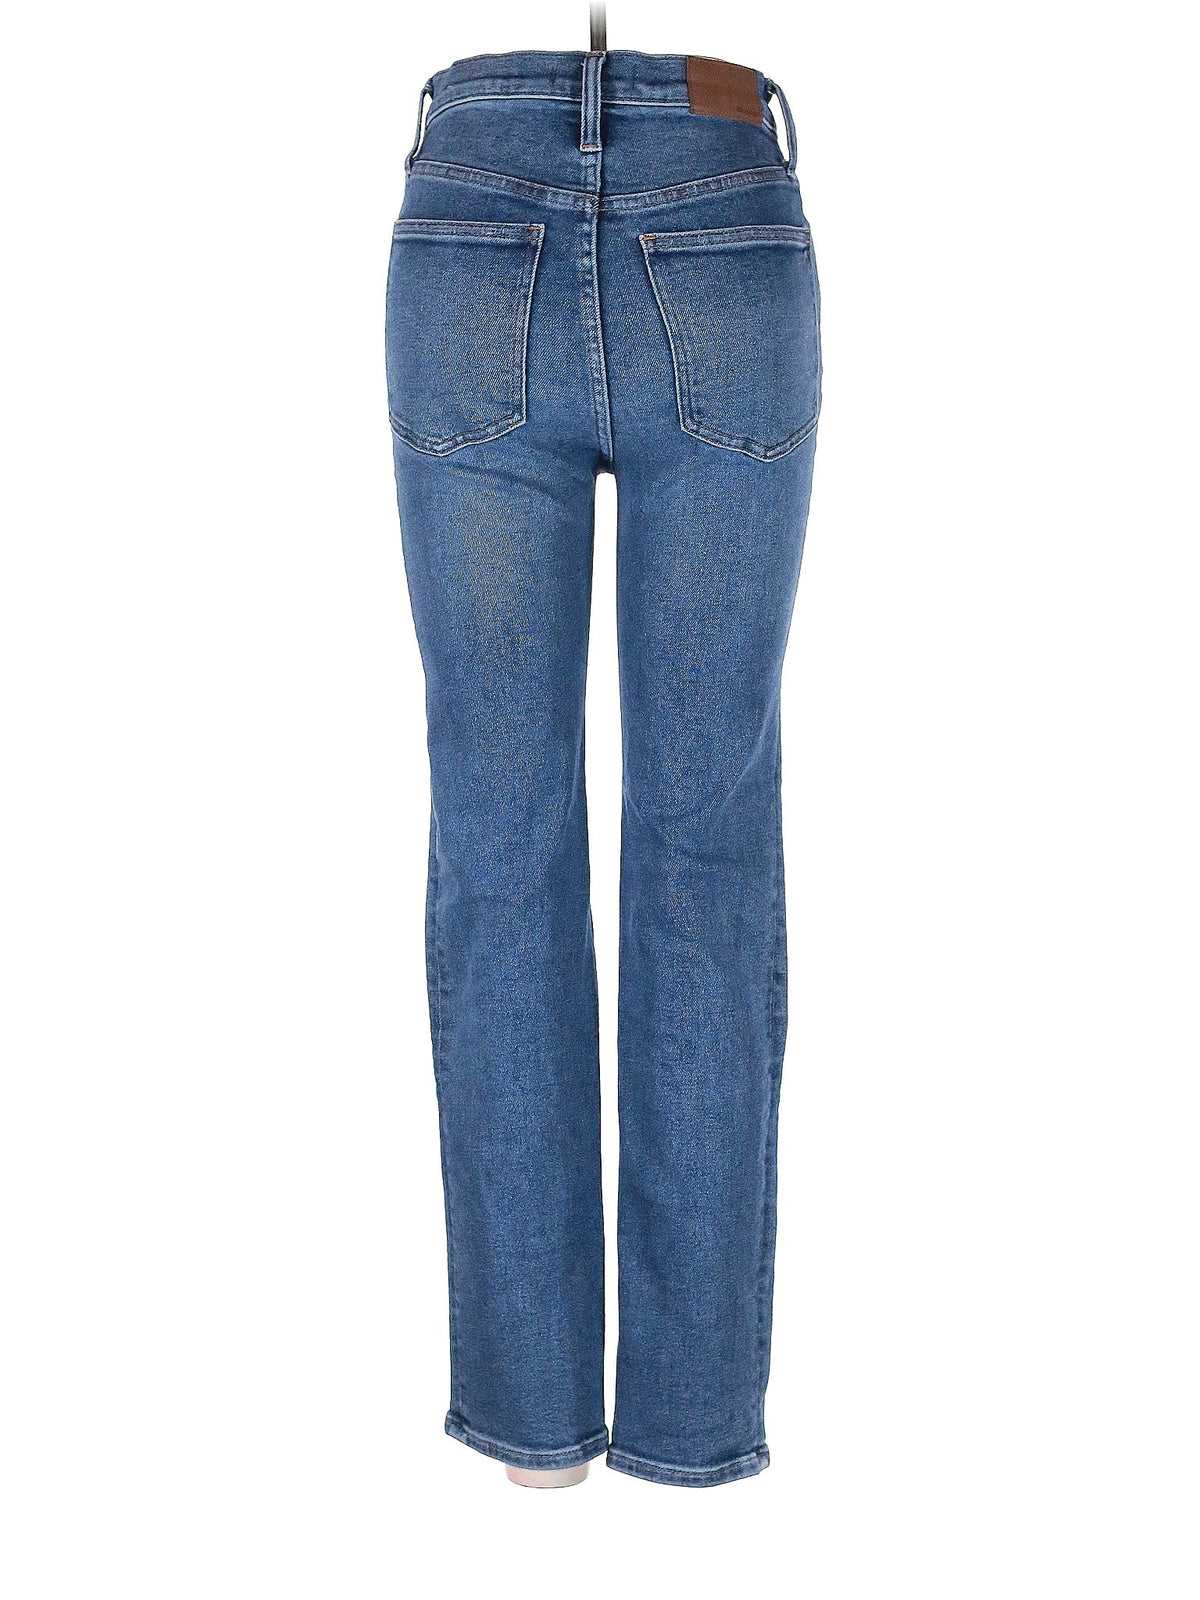 High-Rise Straight-leg Jeans in Light Wash waist size - 26